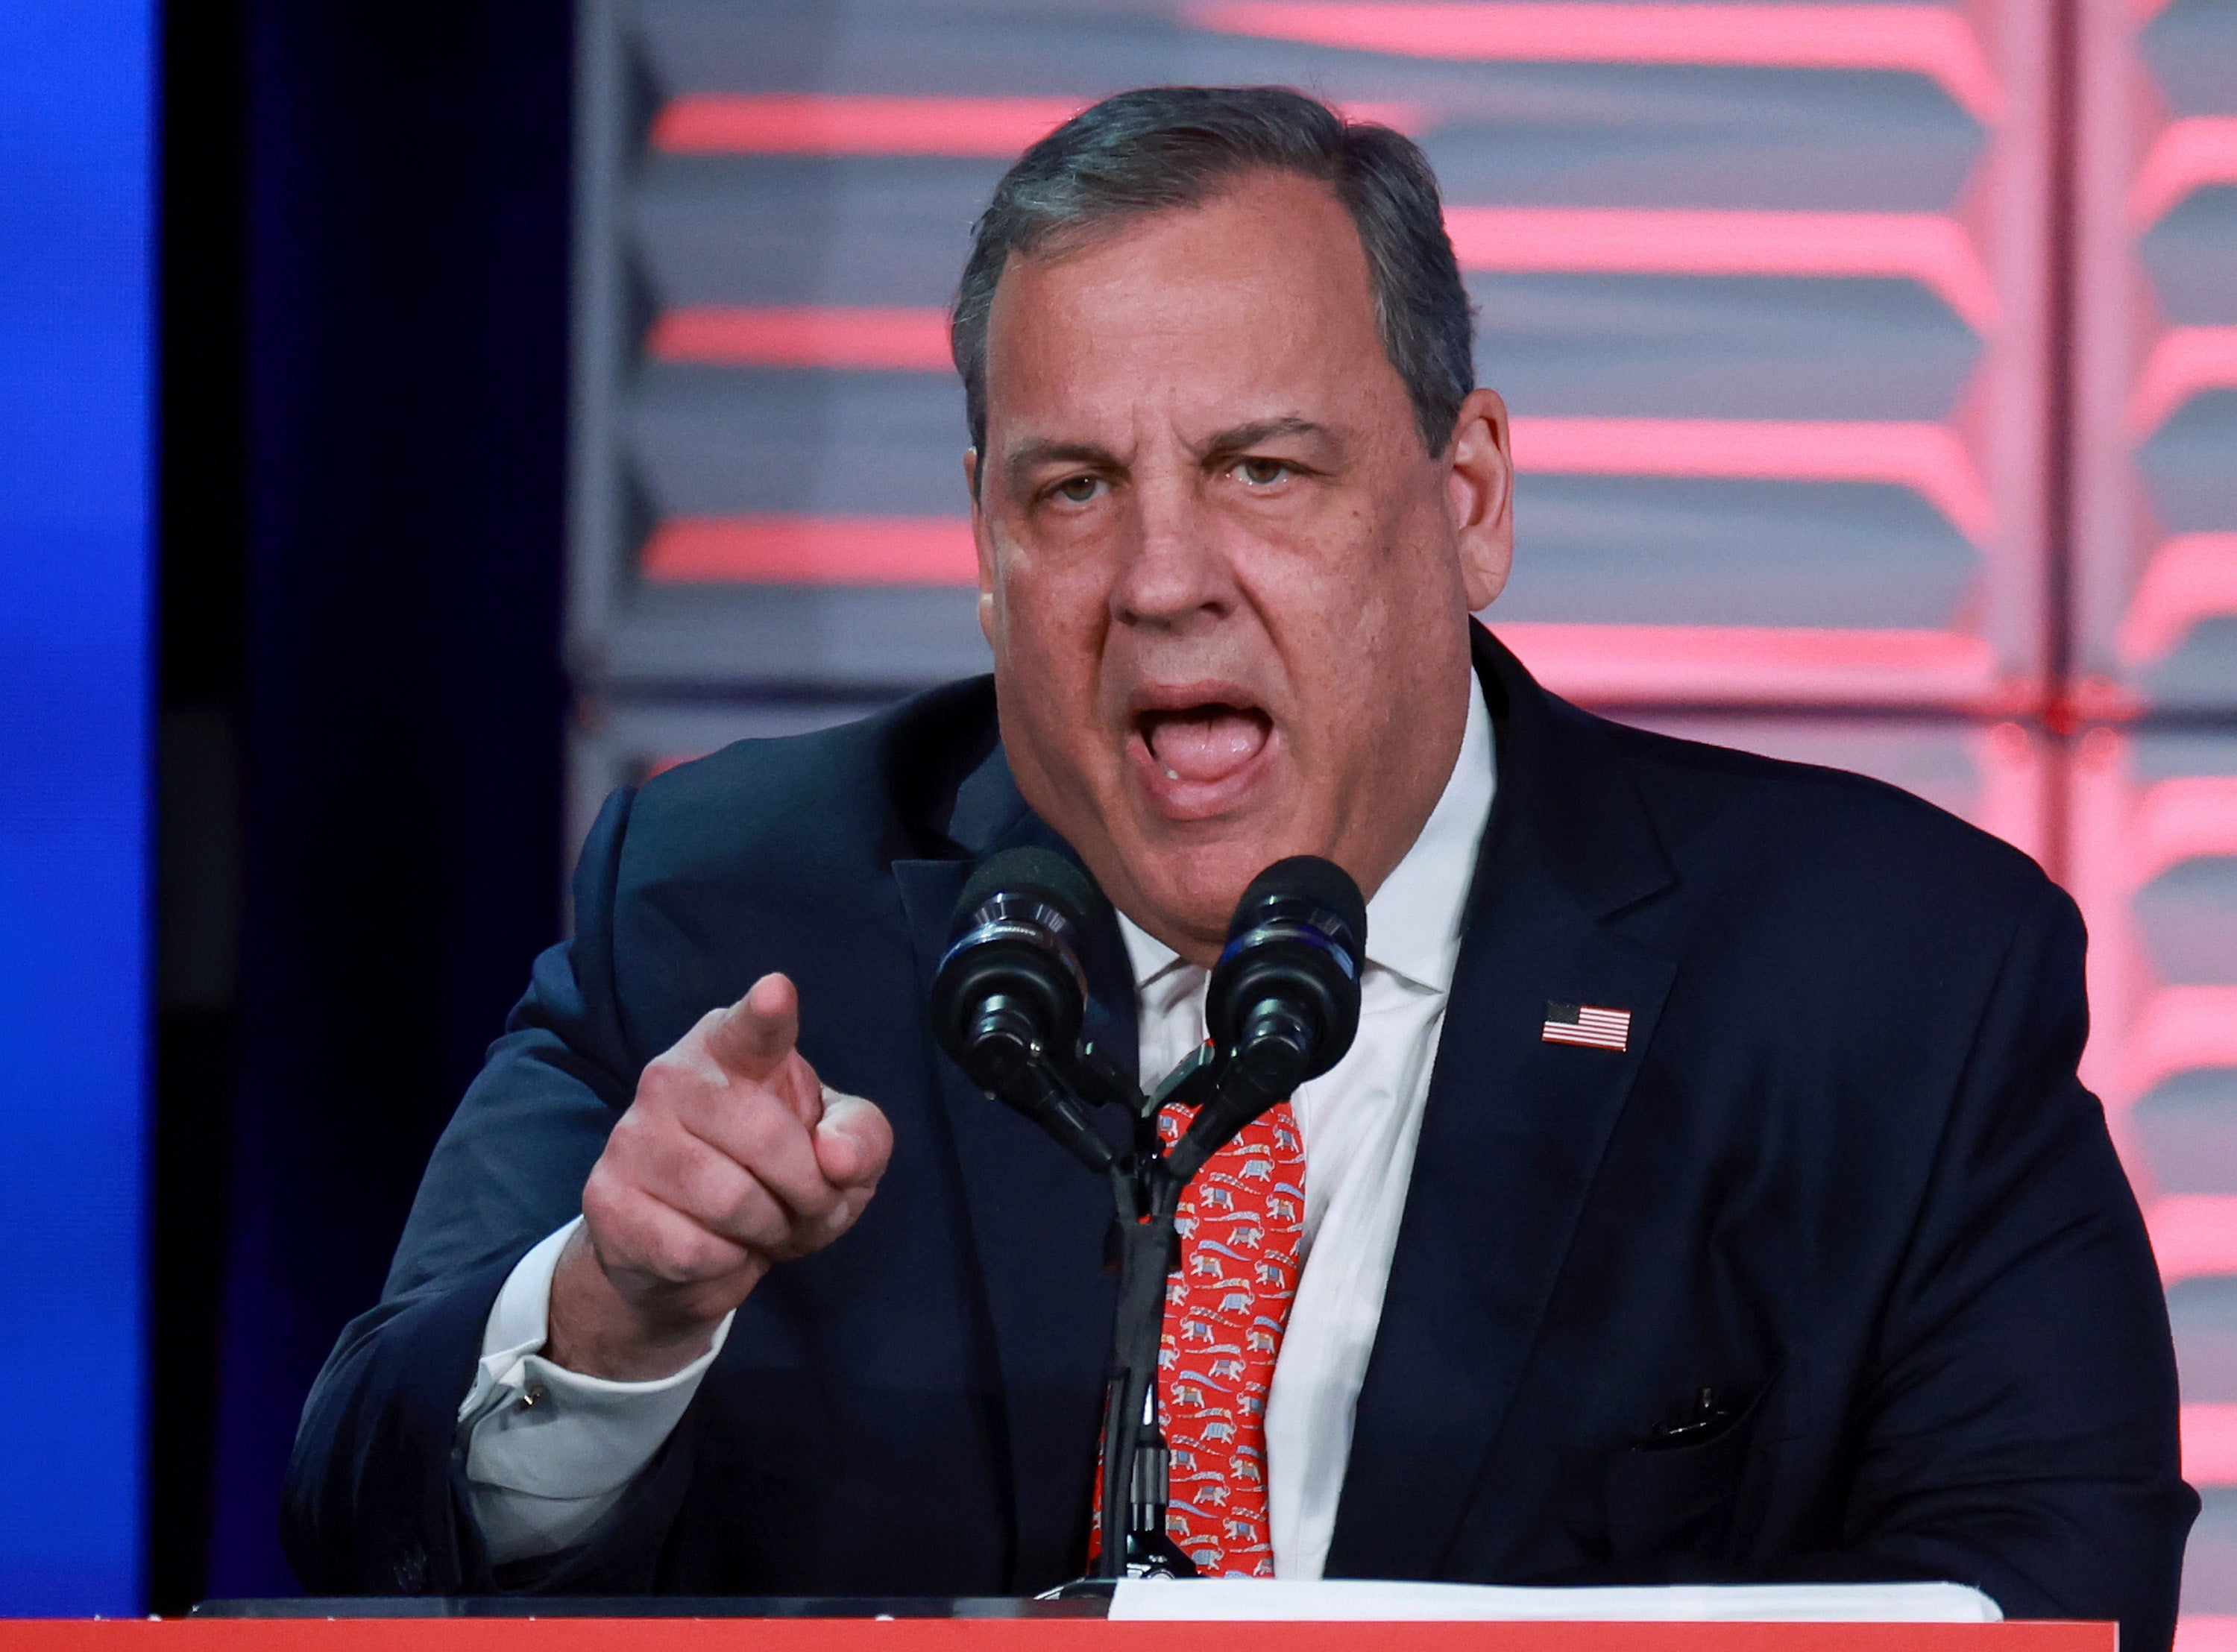 Republican presidential candidate and former Governor of New Jersey Chris Christie speaks during the Florida Freedom Summit at the Gaylord Palms Resort on November 04, 2023 in Kissimmee, Florida